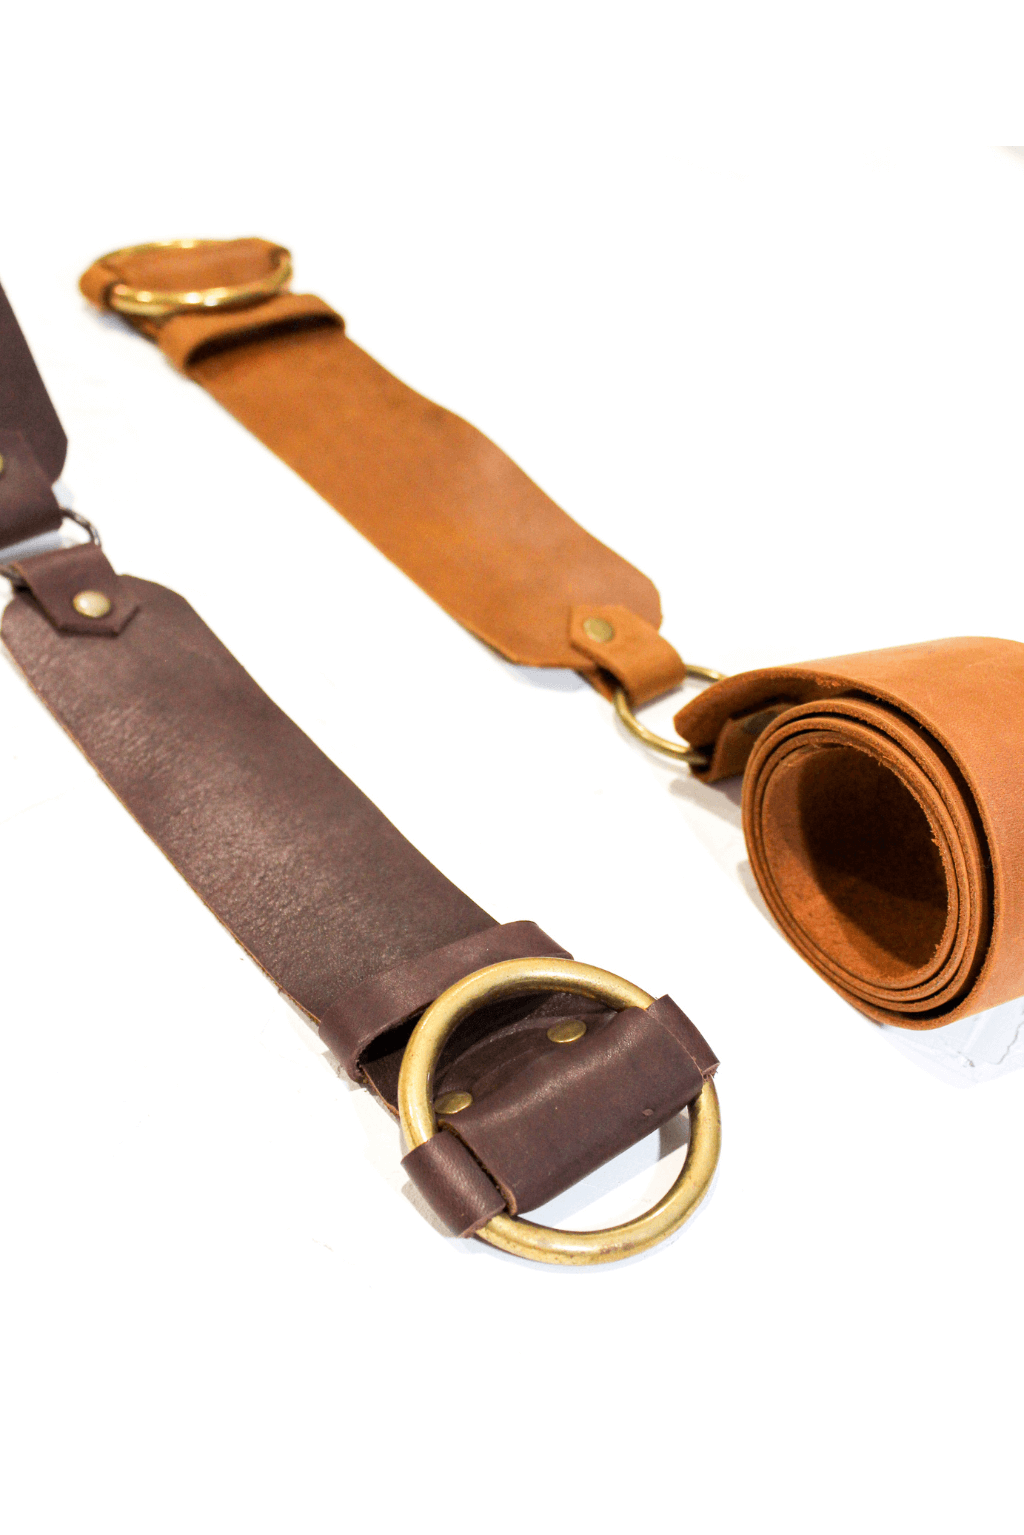 Leather Ring Belt Wide - chocolate